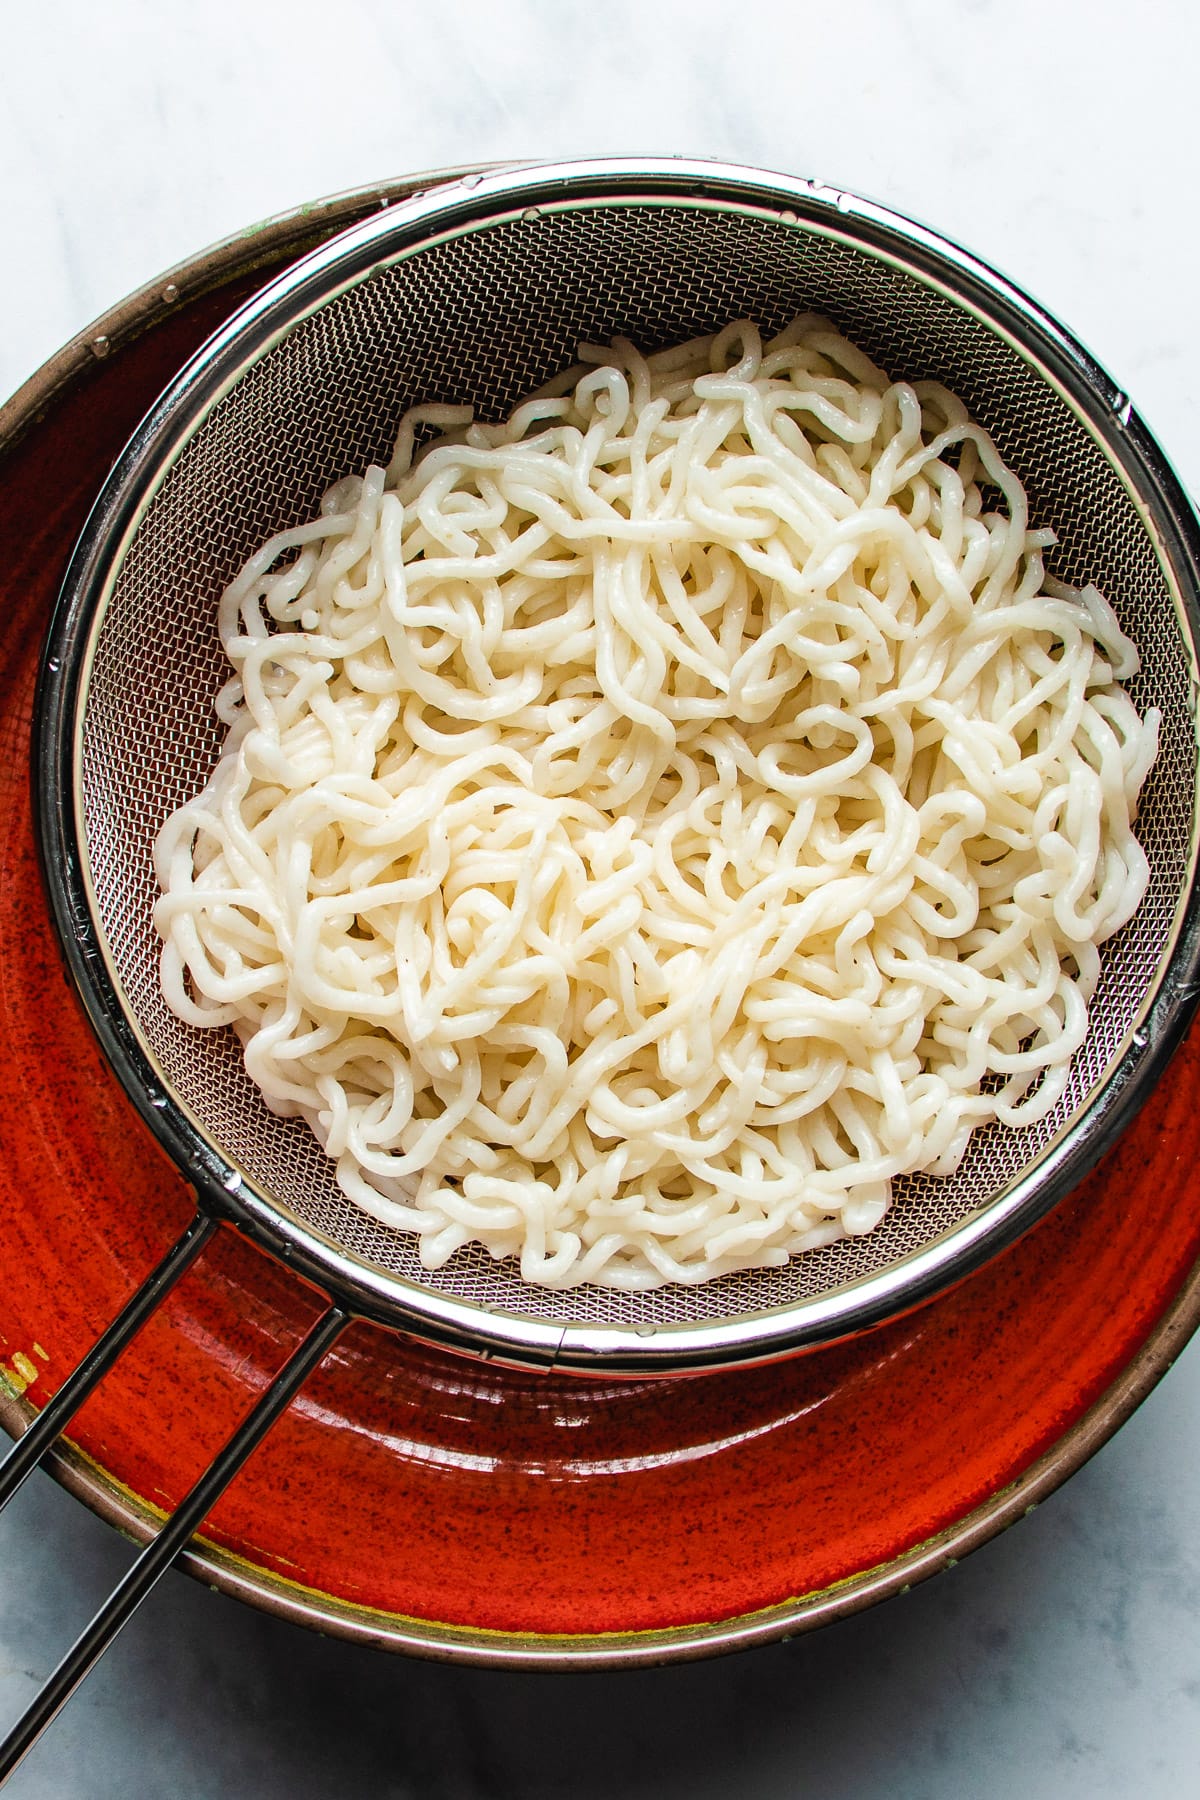 A close shot of the uncooked miracle konjac noodles